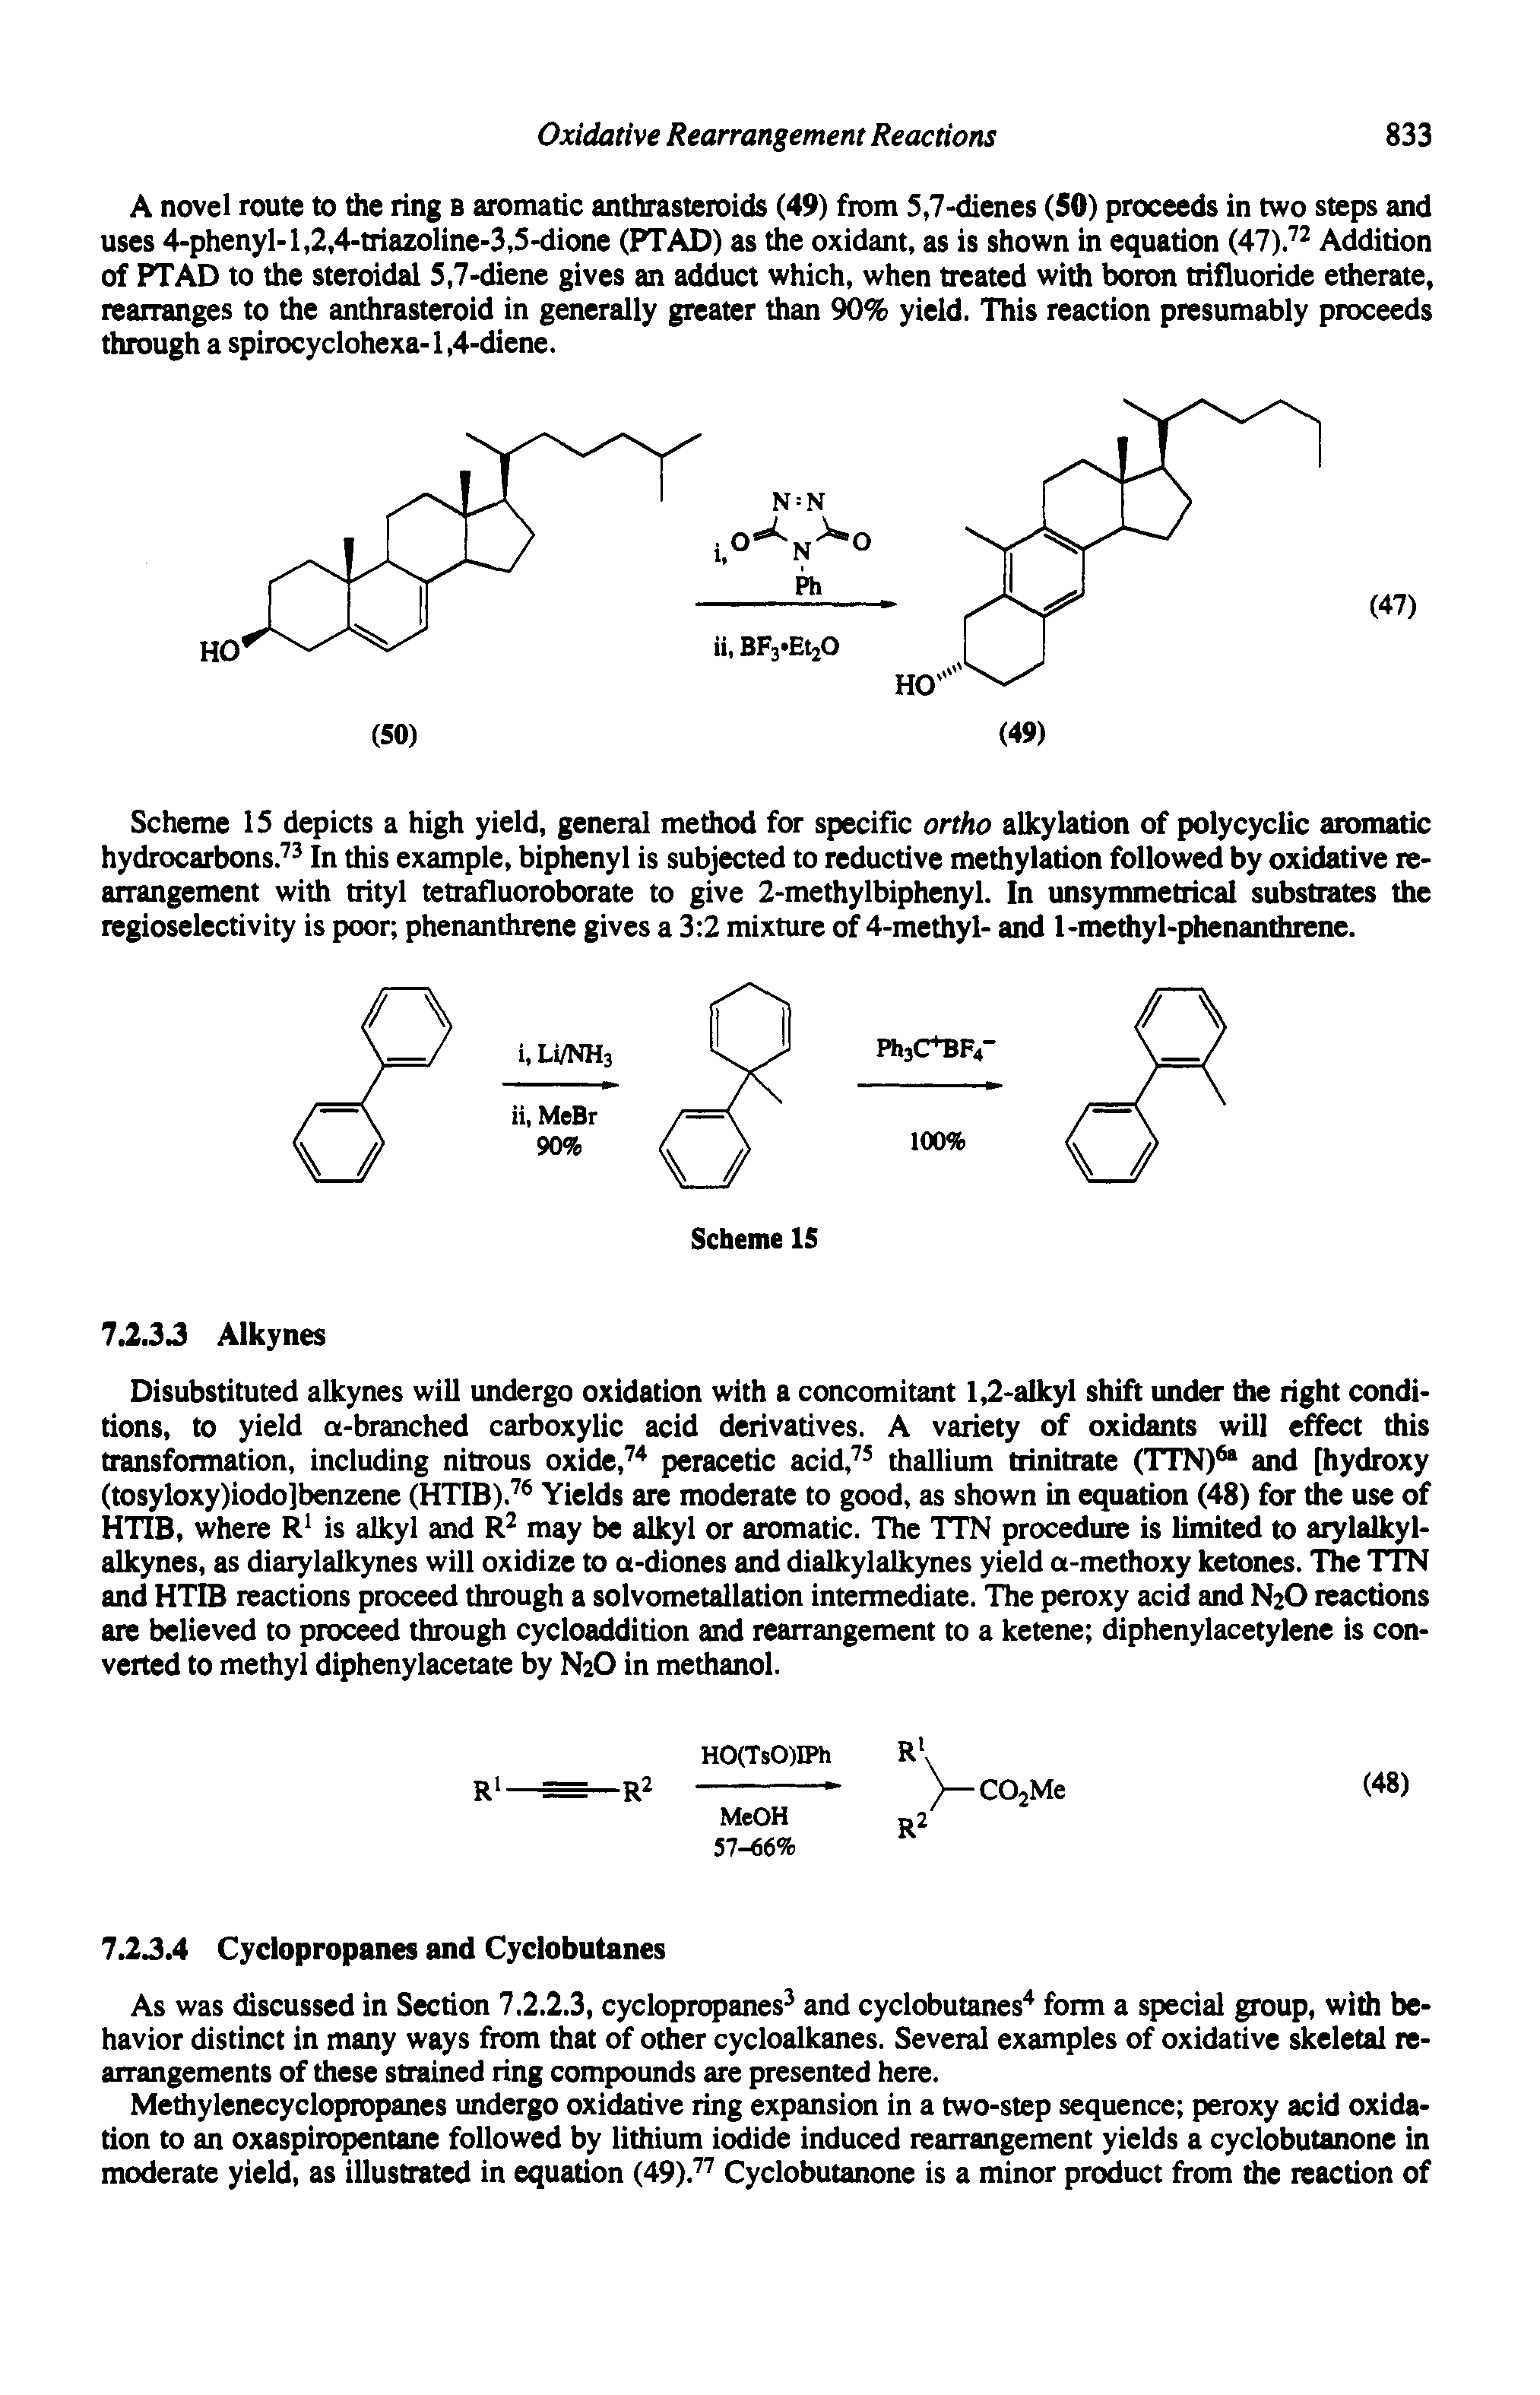 Scheme IS depicts a high yield, general method for specific ortho alkylation of polycyclic aromatic hydrocarbons. In this example, biphenyl is subjected to reductive methylation followed by oxidative rearrangement with trityl tetrafluoroborate to give 2-methylbiphenyl. In unsymmetrical substrates the regioselectivity is poor phenanthrene gives a 3 2 mixture of 4-methyl- and 1-methyl-phenanthrene.